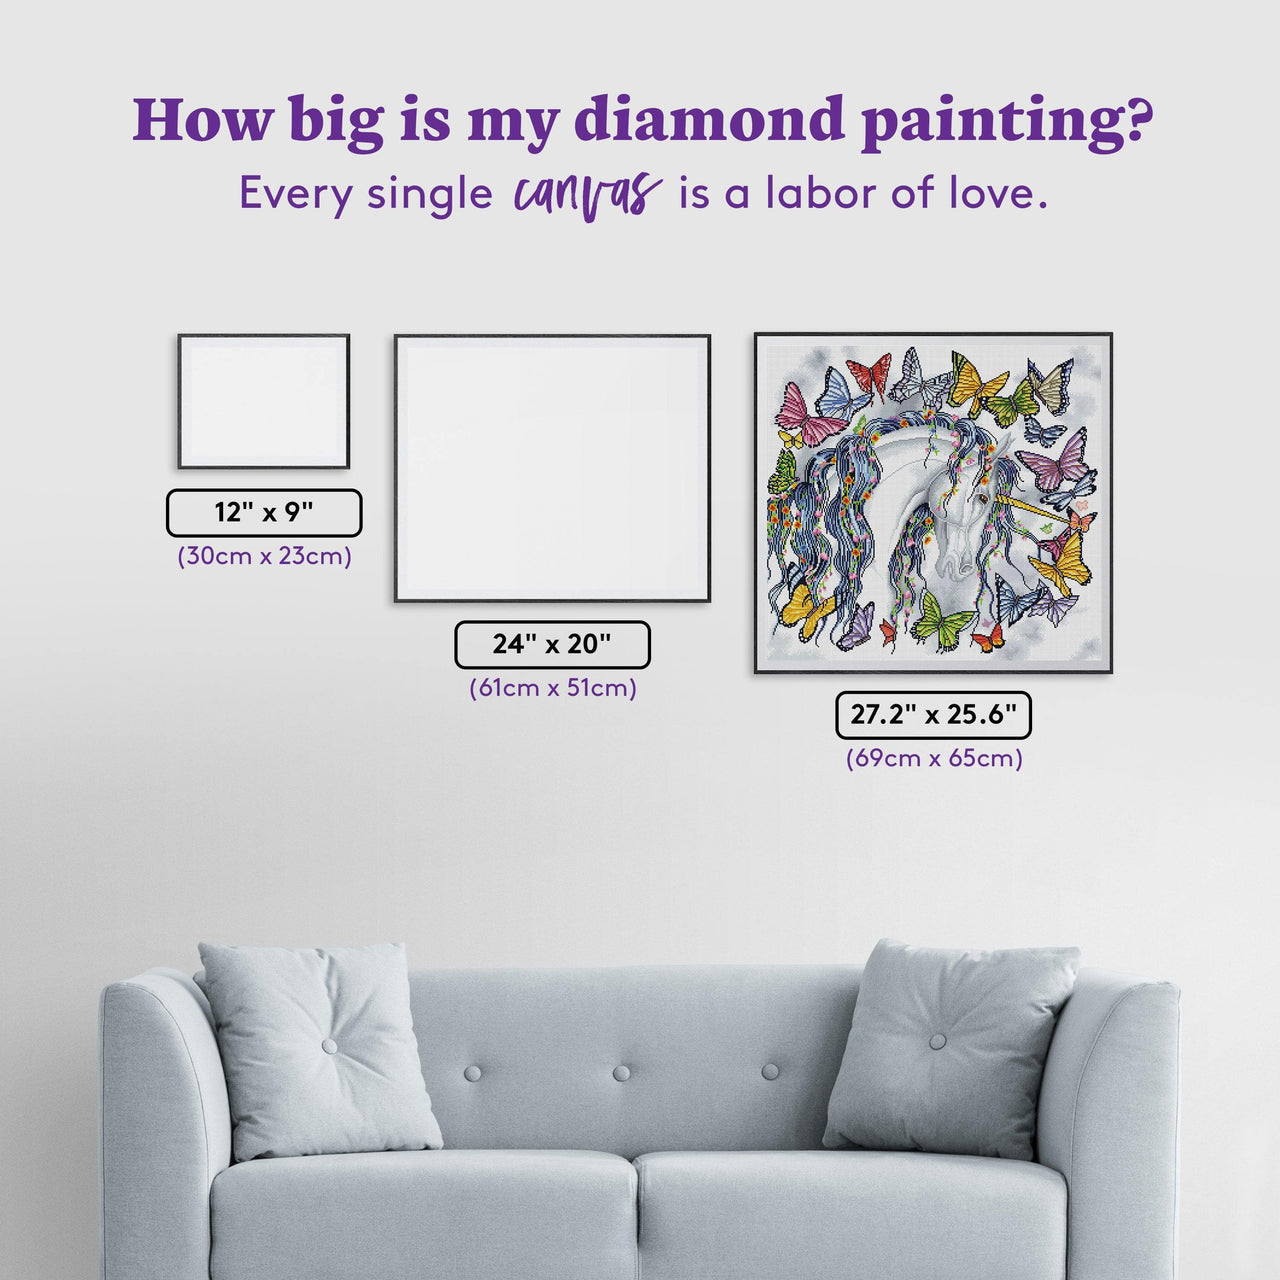 Diamond Painting Petal 27.2" x 25.6" (69cm x 65cm) / Square with 51 Colors including 3 ABs / 72,297